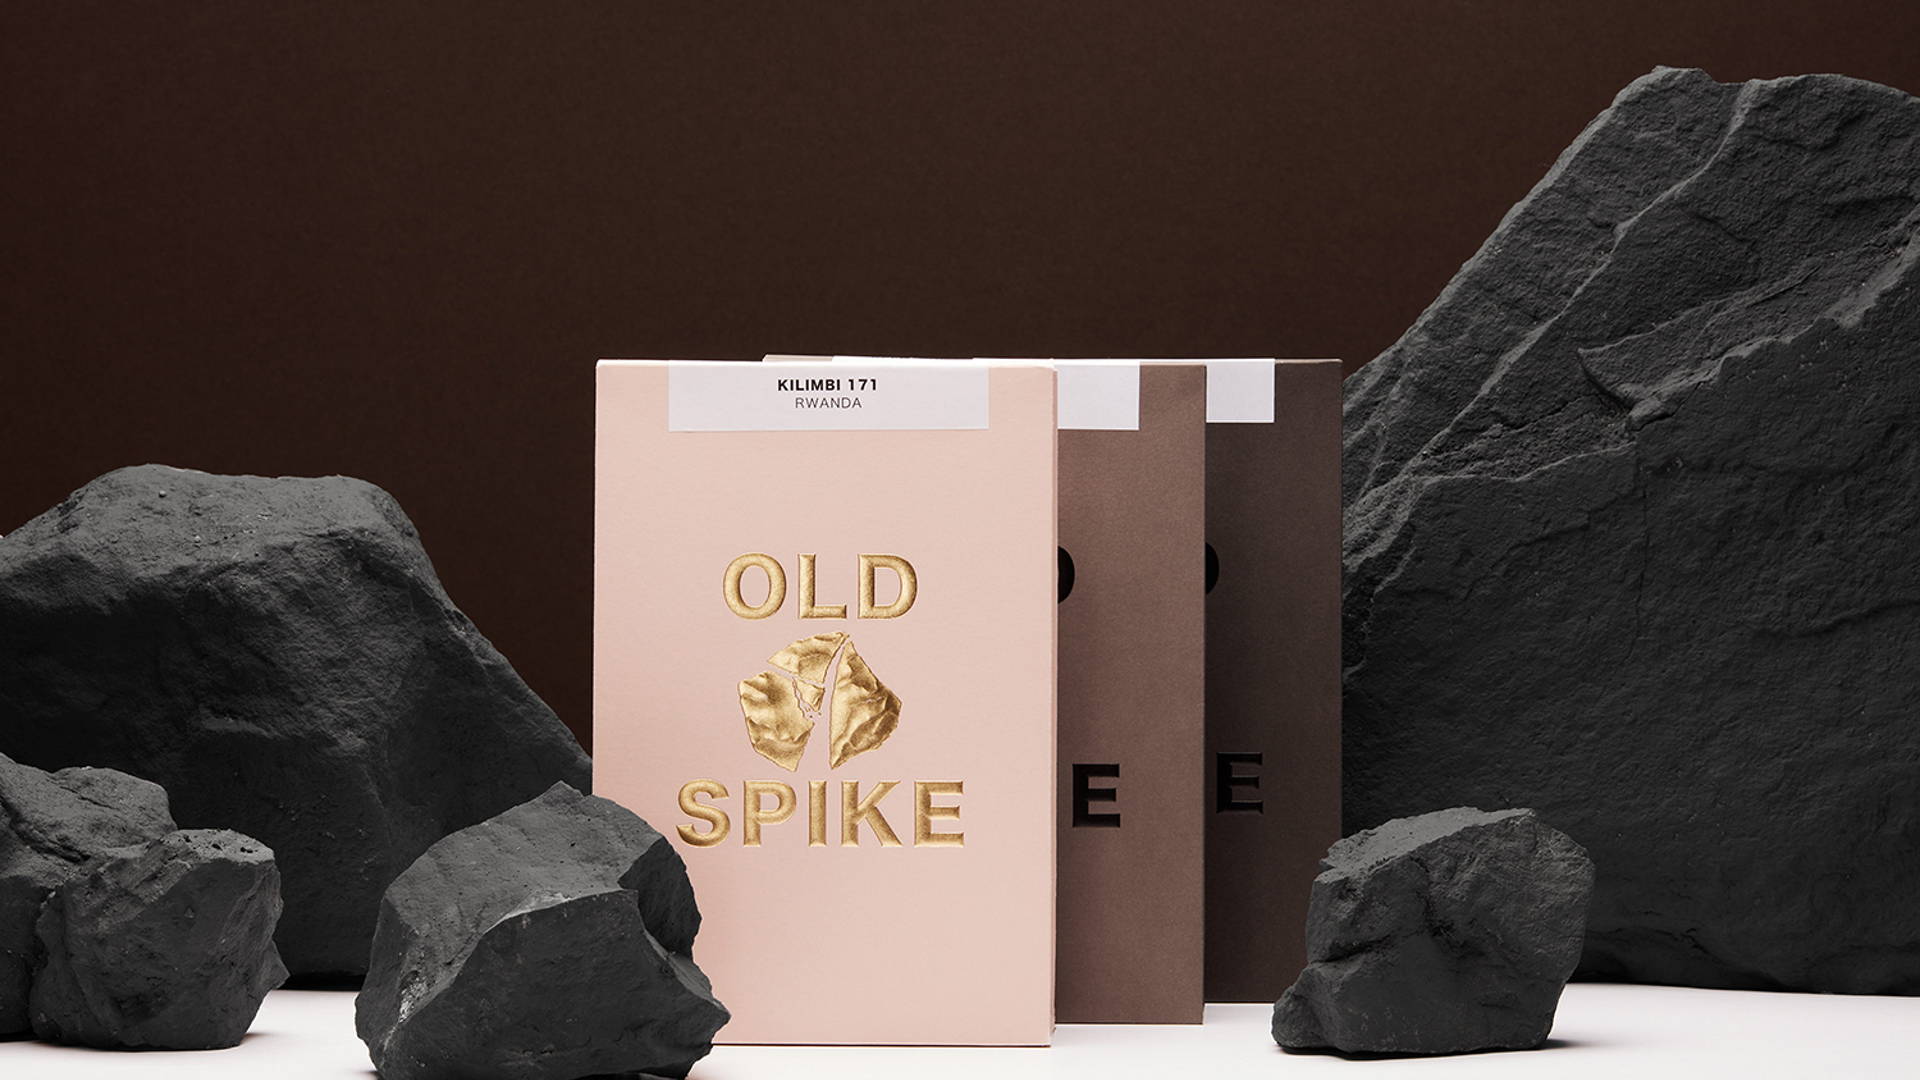 Old Spike Specializes in Coffee & Giving Back  Dieline - Design, Branding  & Packaging Inspiration